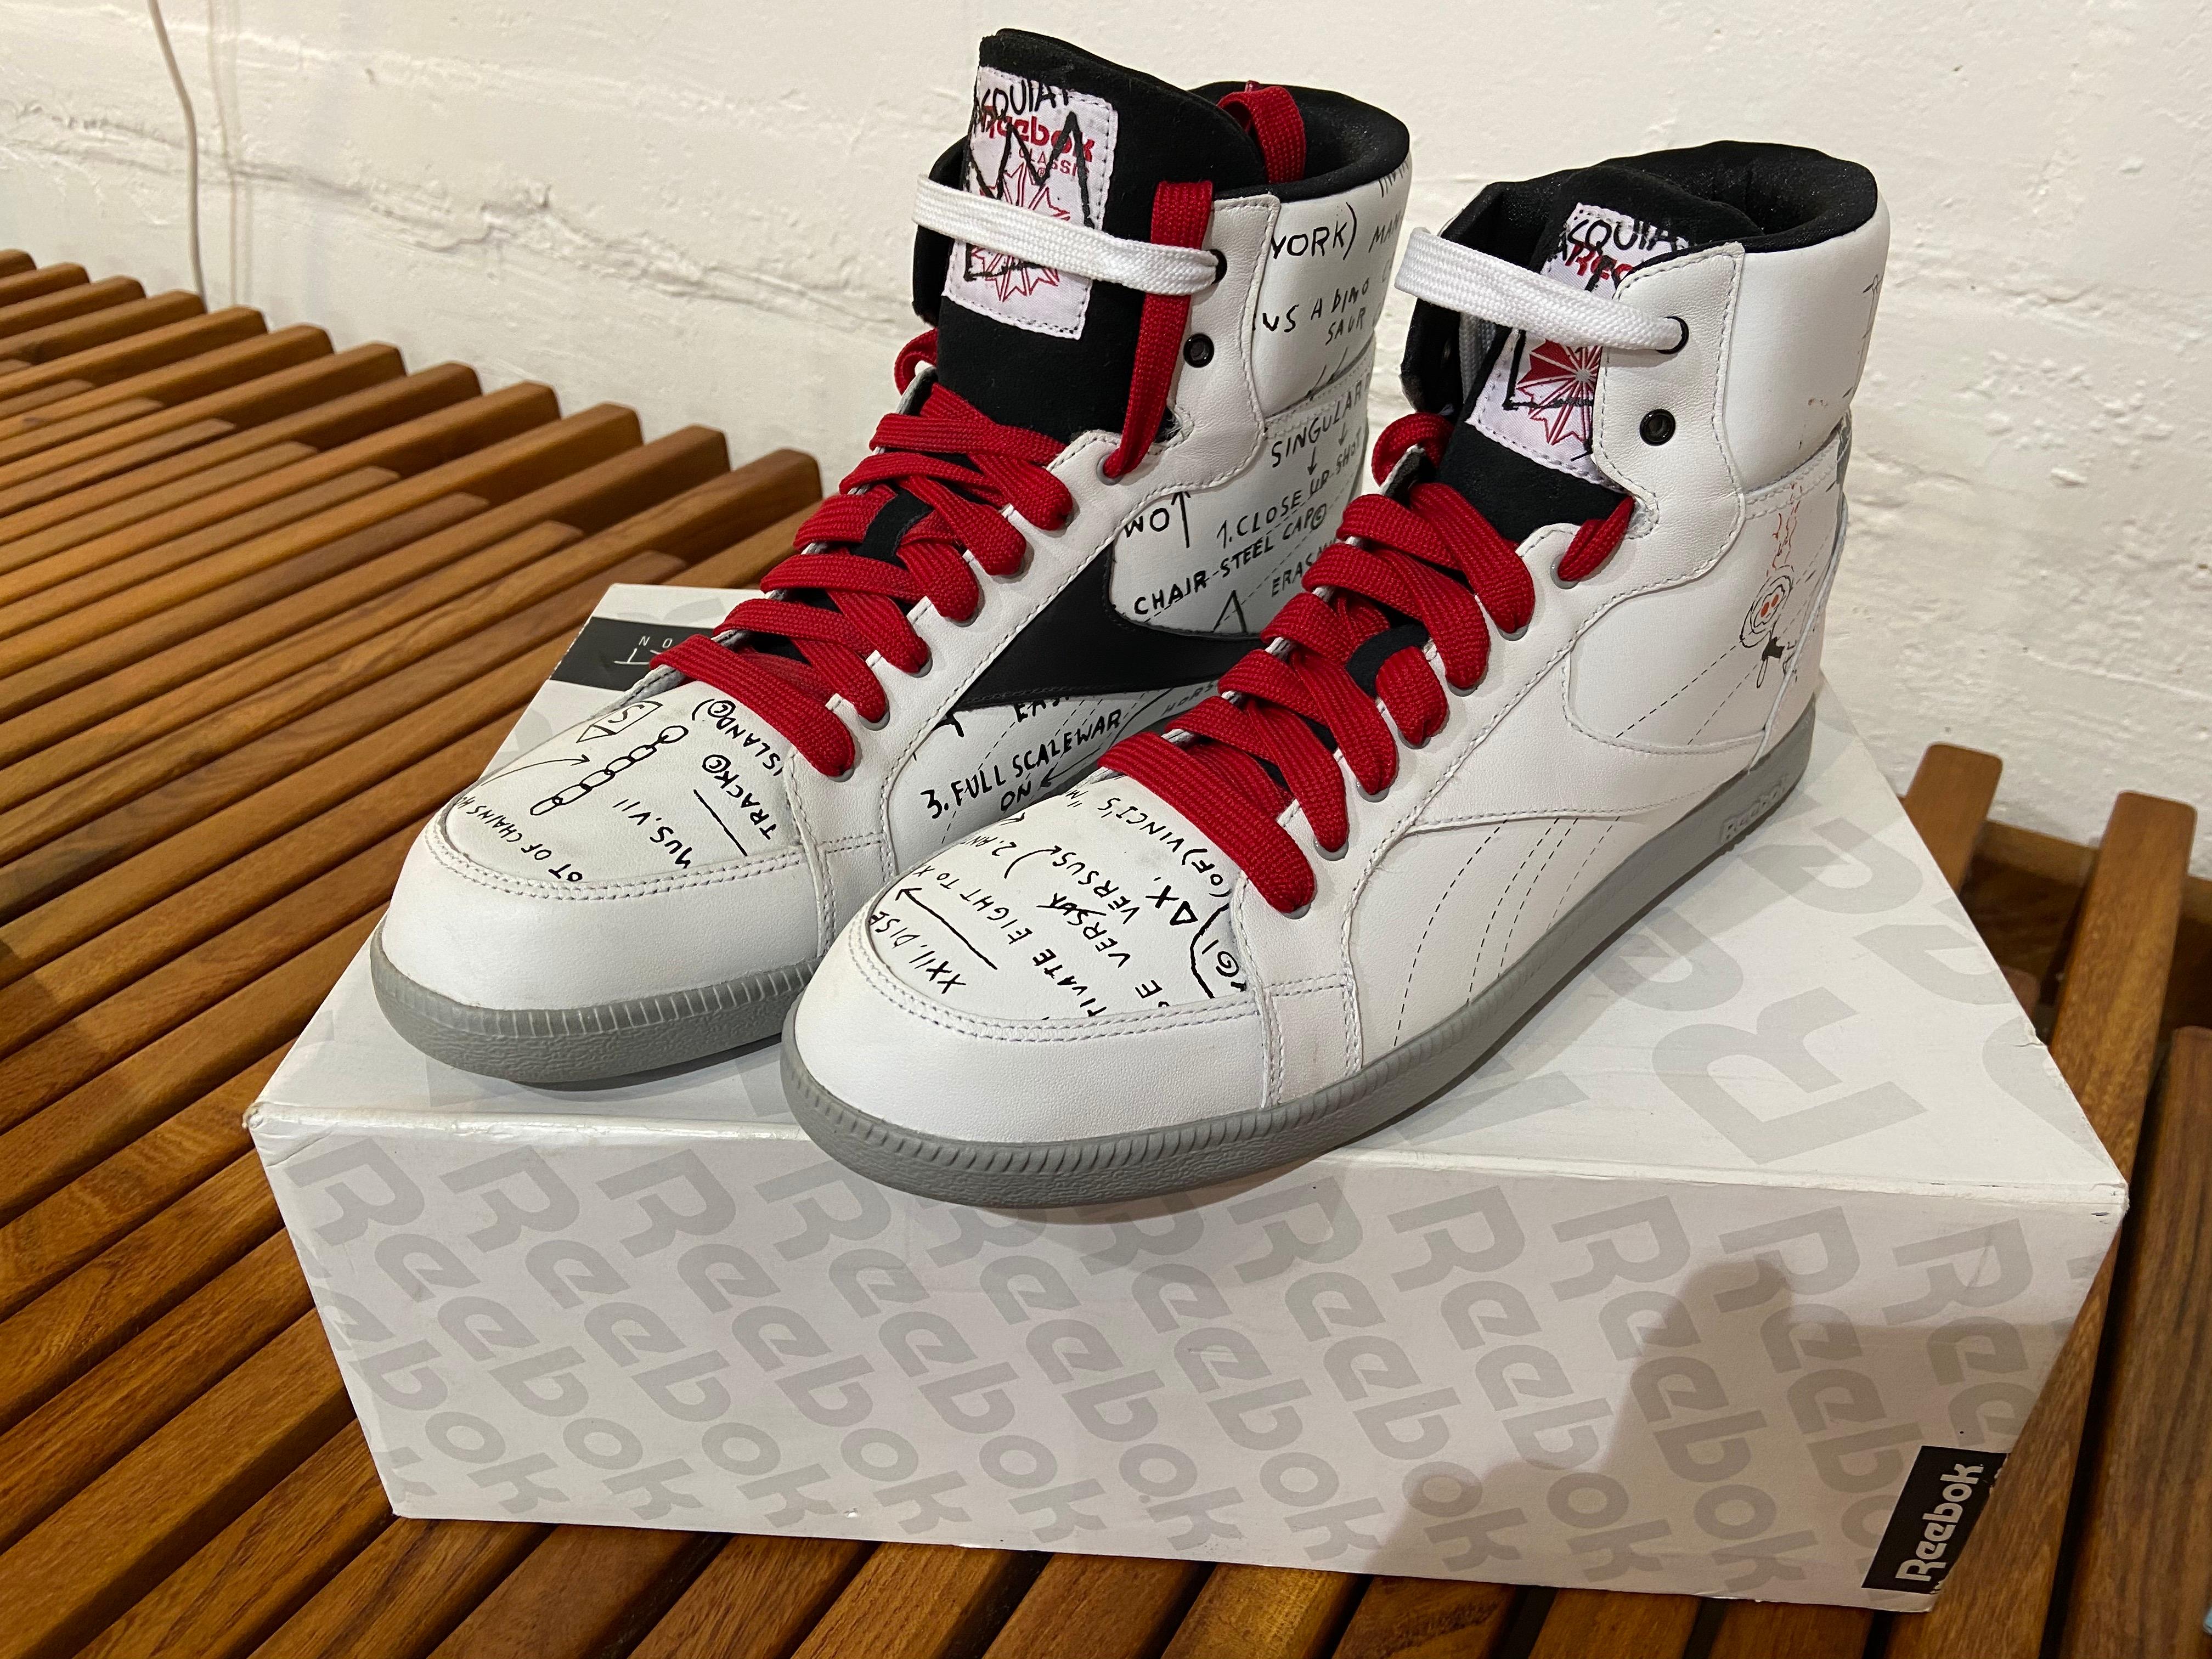 Modern Reebok x Basquiat Sneakers Collection – White & Red, 2012